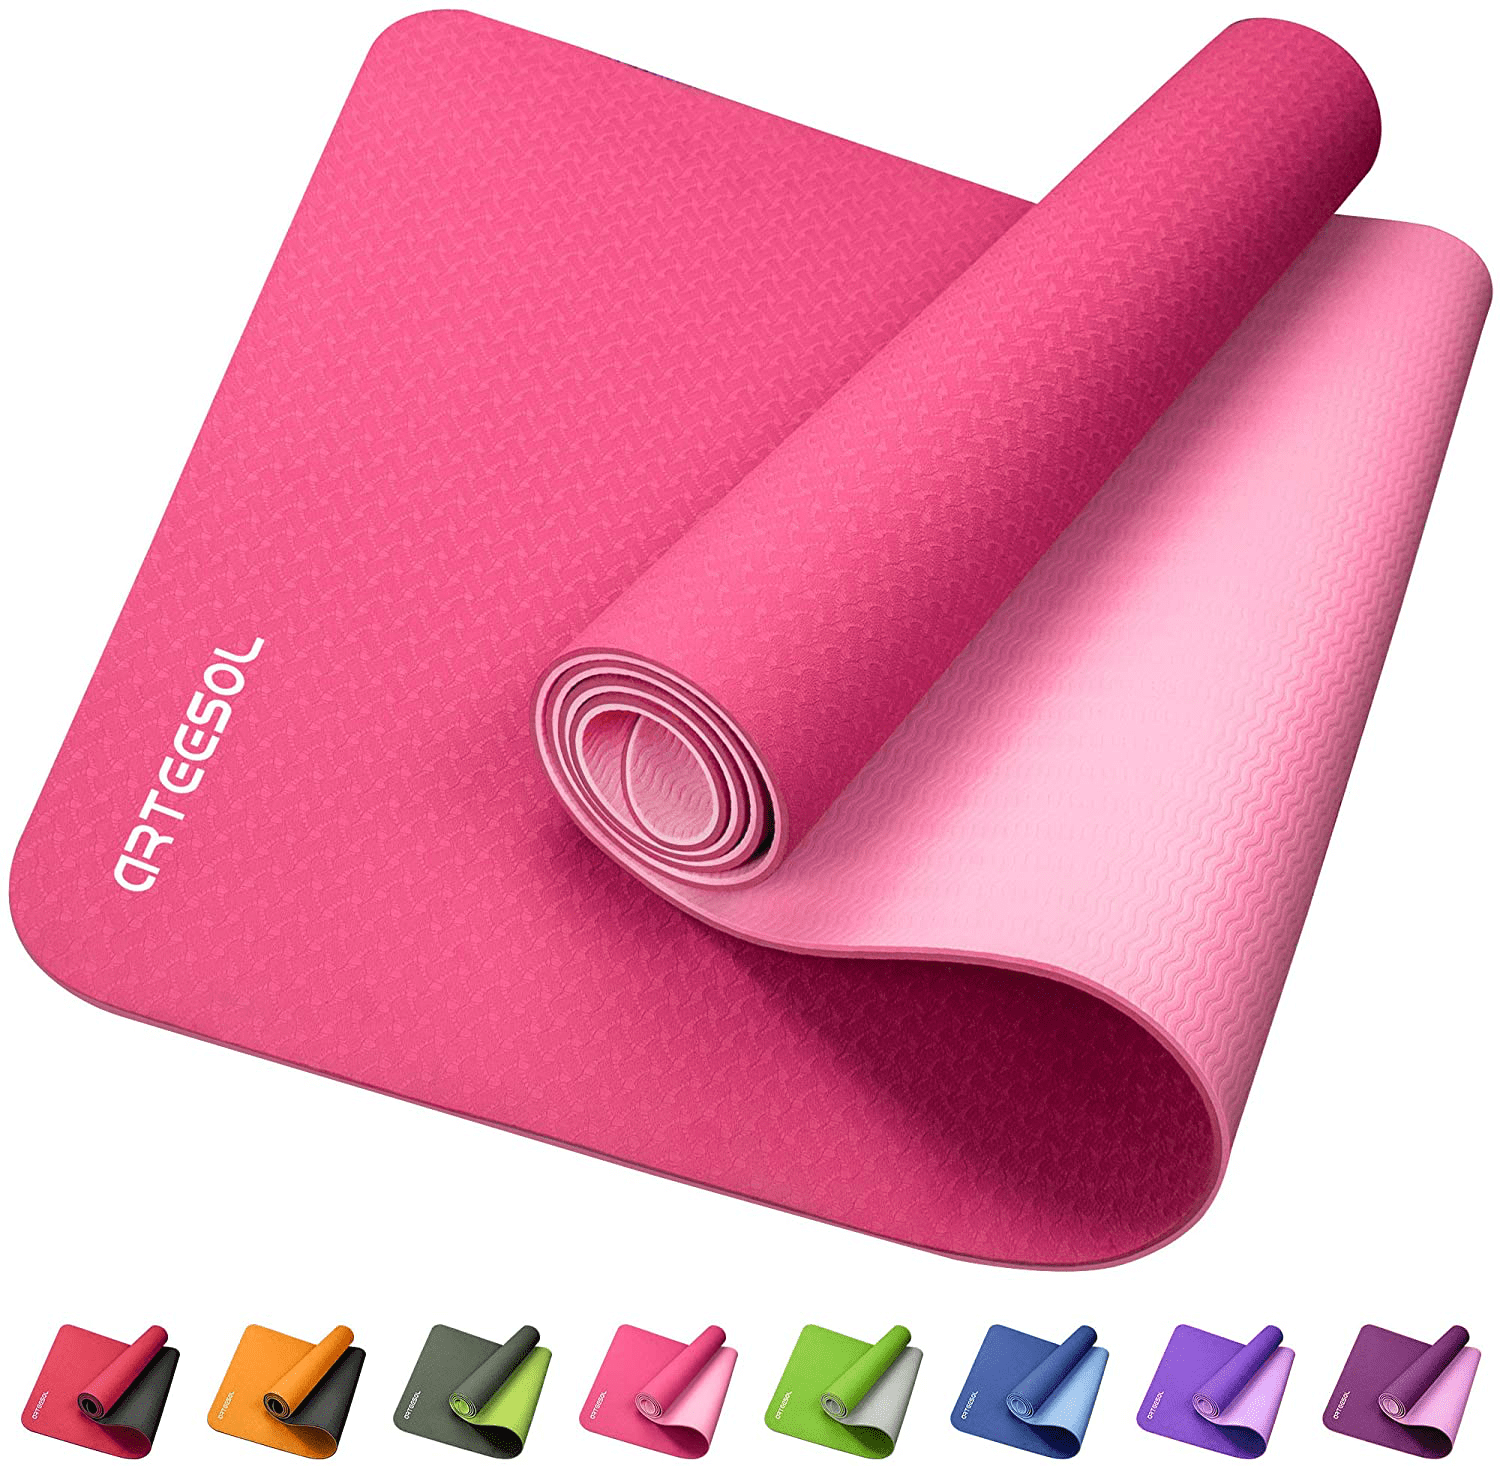 72L x 24W x 1/4 Inch Thick Core Fitness and Floor Exercises arteesol Yoga Mat Workout Men & Women Eco-Friendly TPE Exercise Mats Non-Slip Pilates Mat with Carrying Strap for Yoga 